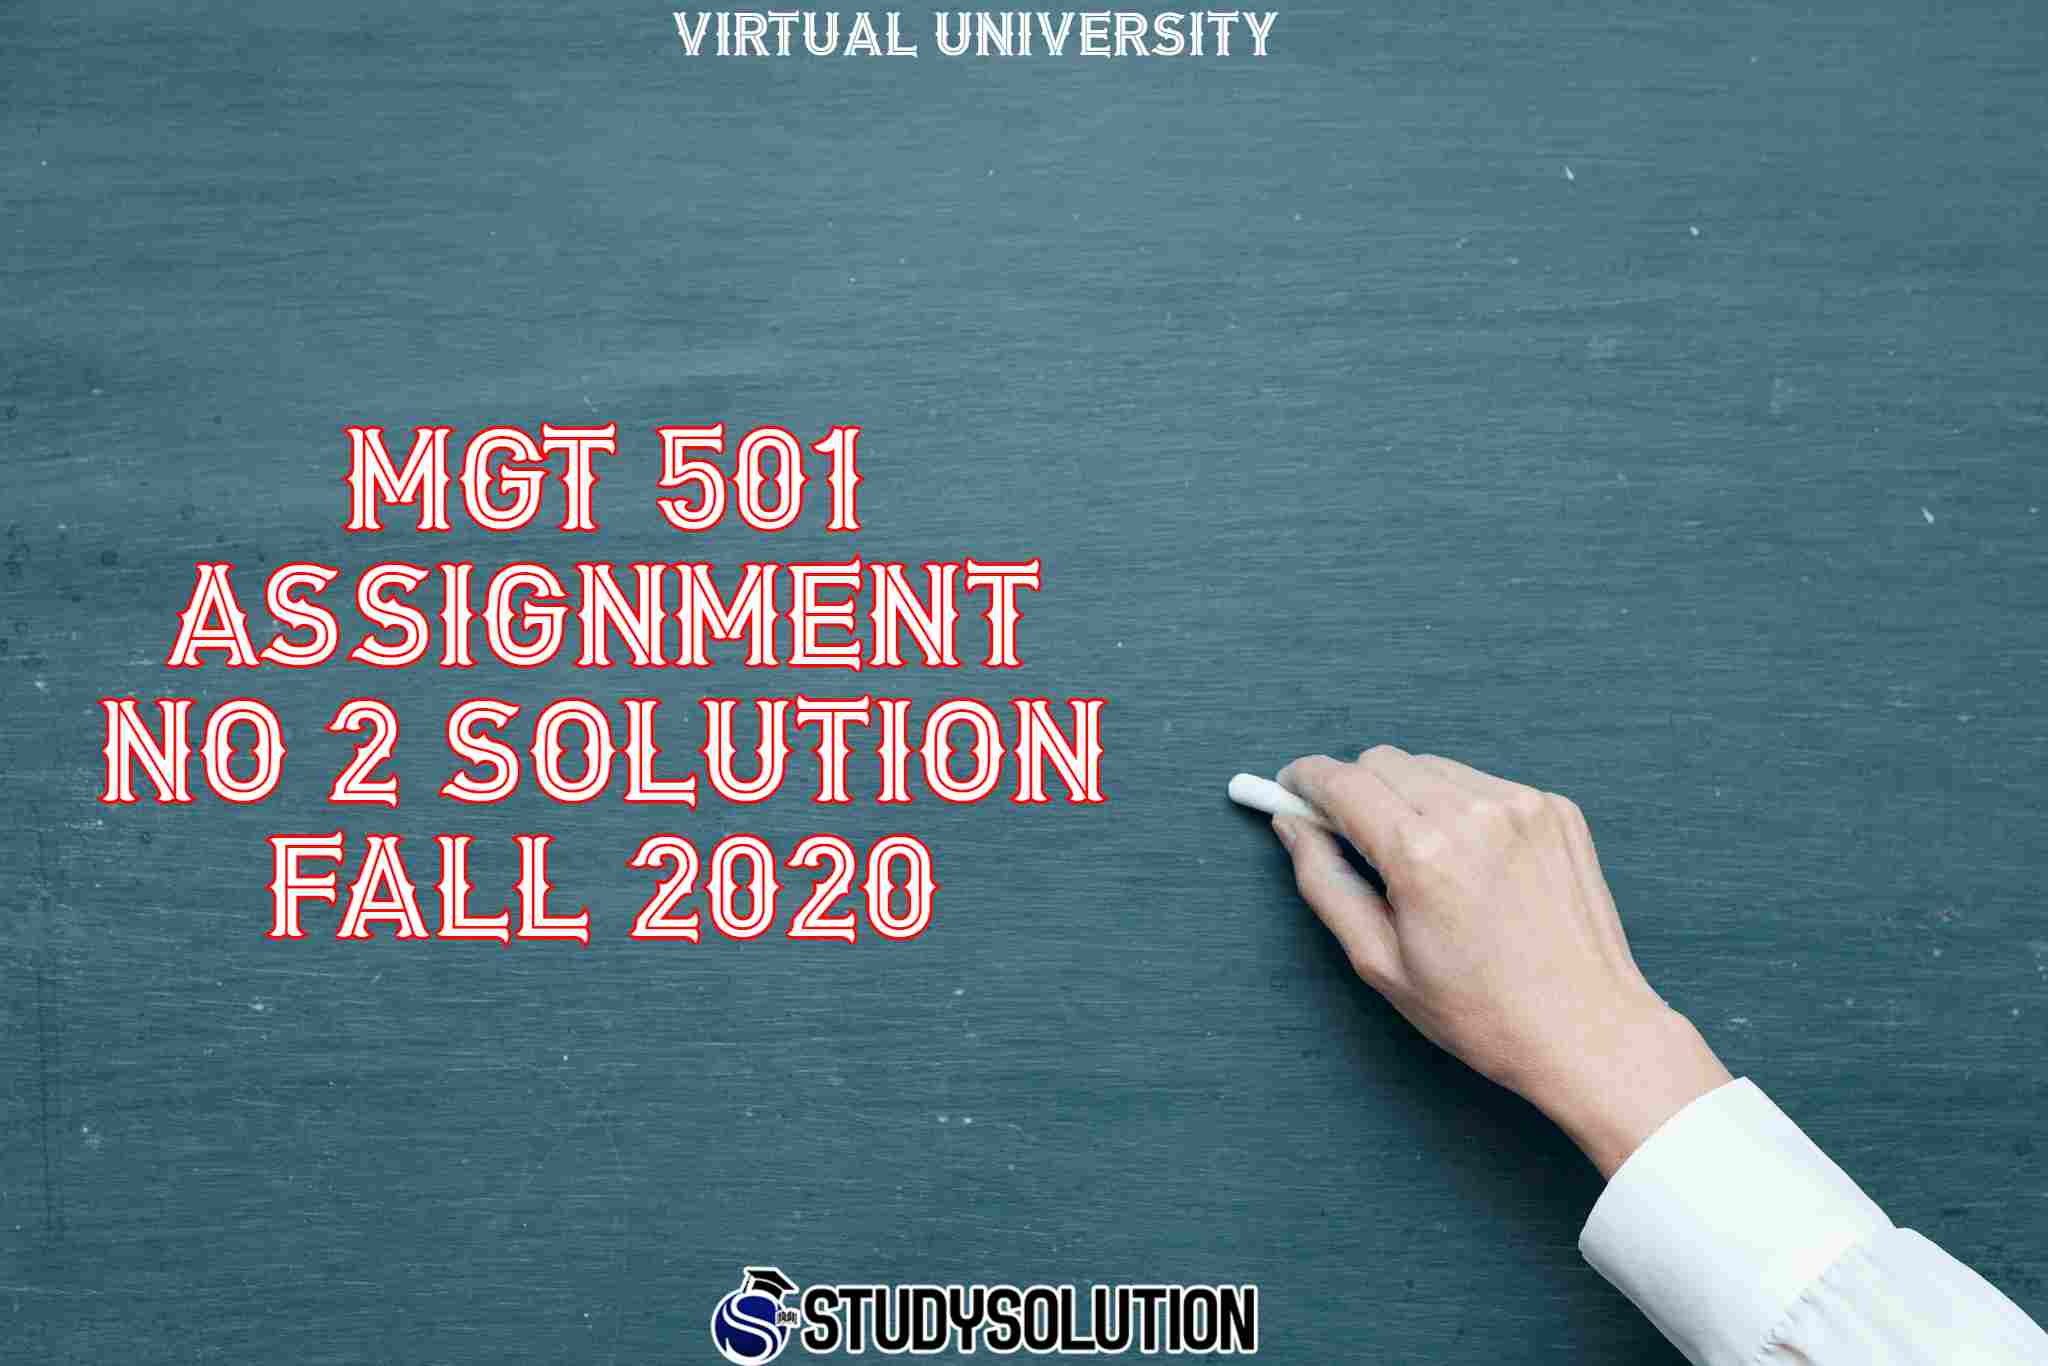 MGT 501 Assignment No 2 Solution Fall 2020